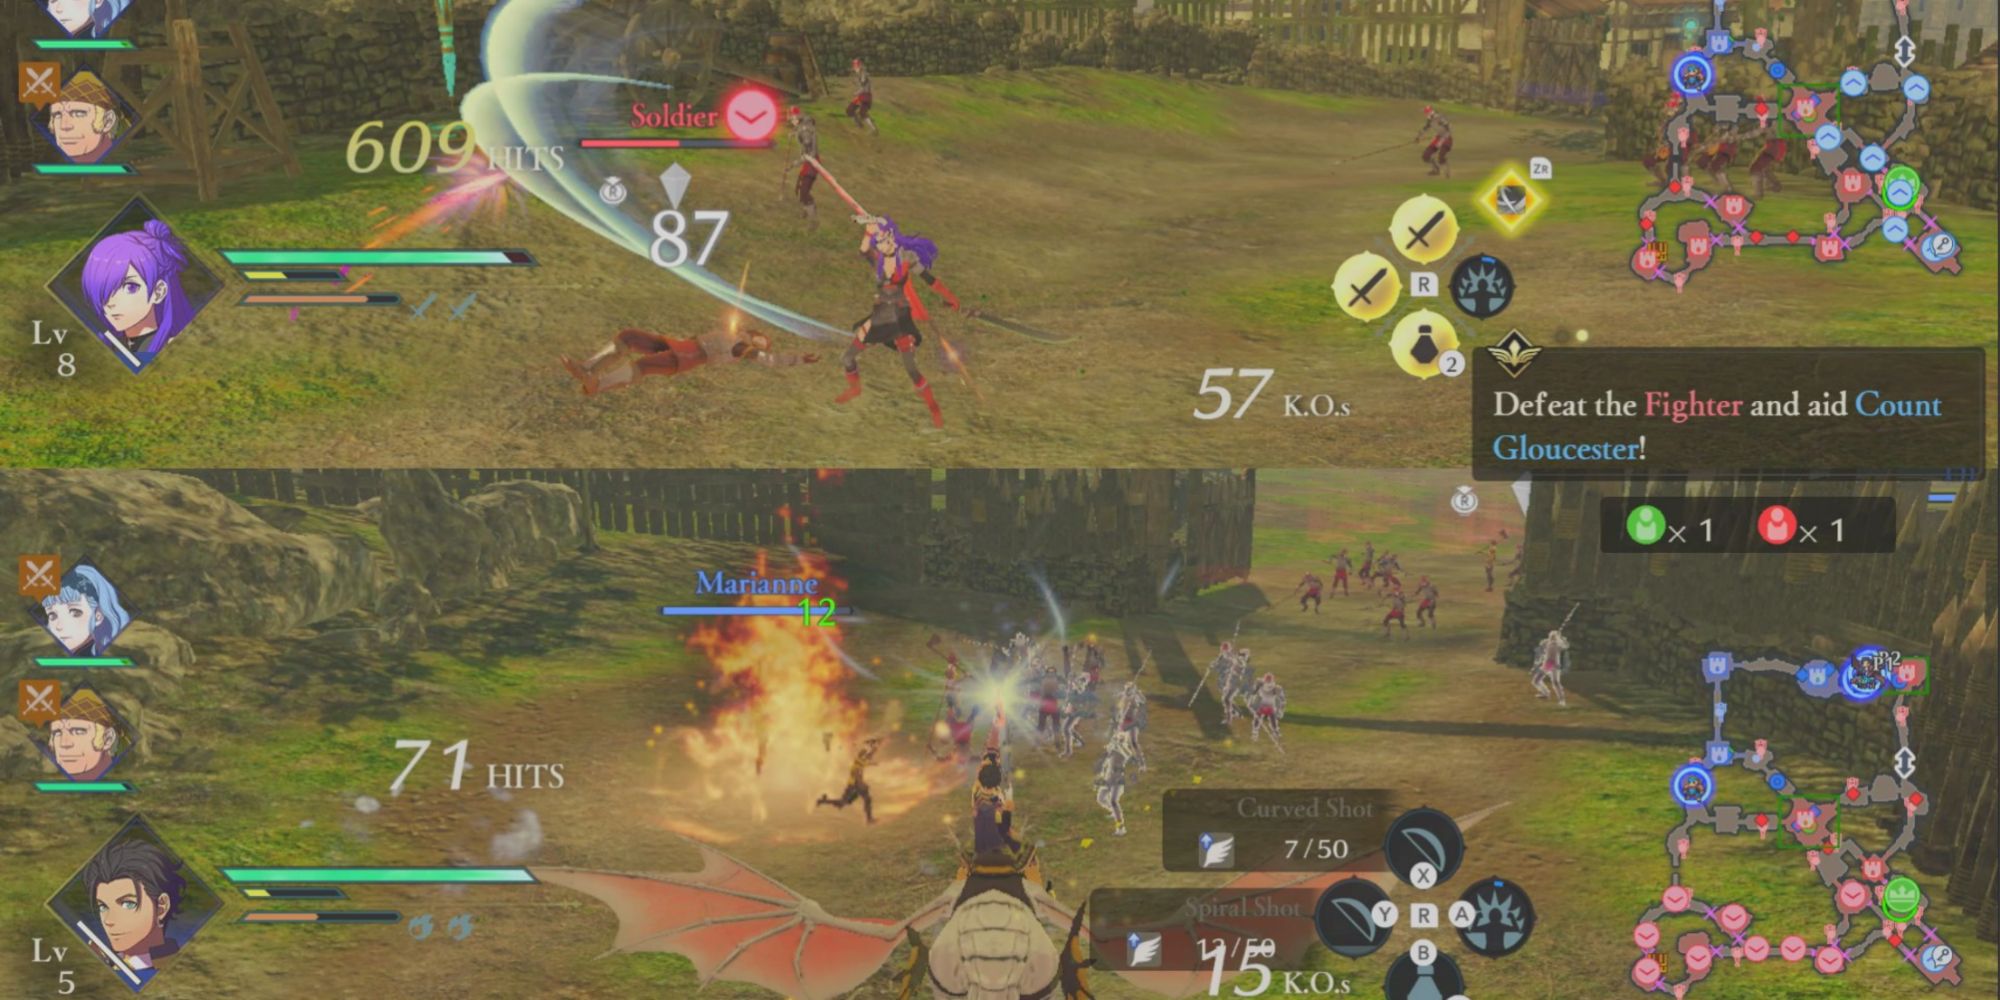 Shez fights enemies at the top of the screen and Claude fires arrows at enemies on the lower half of the screen